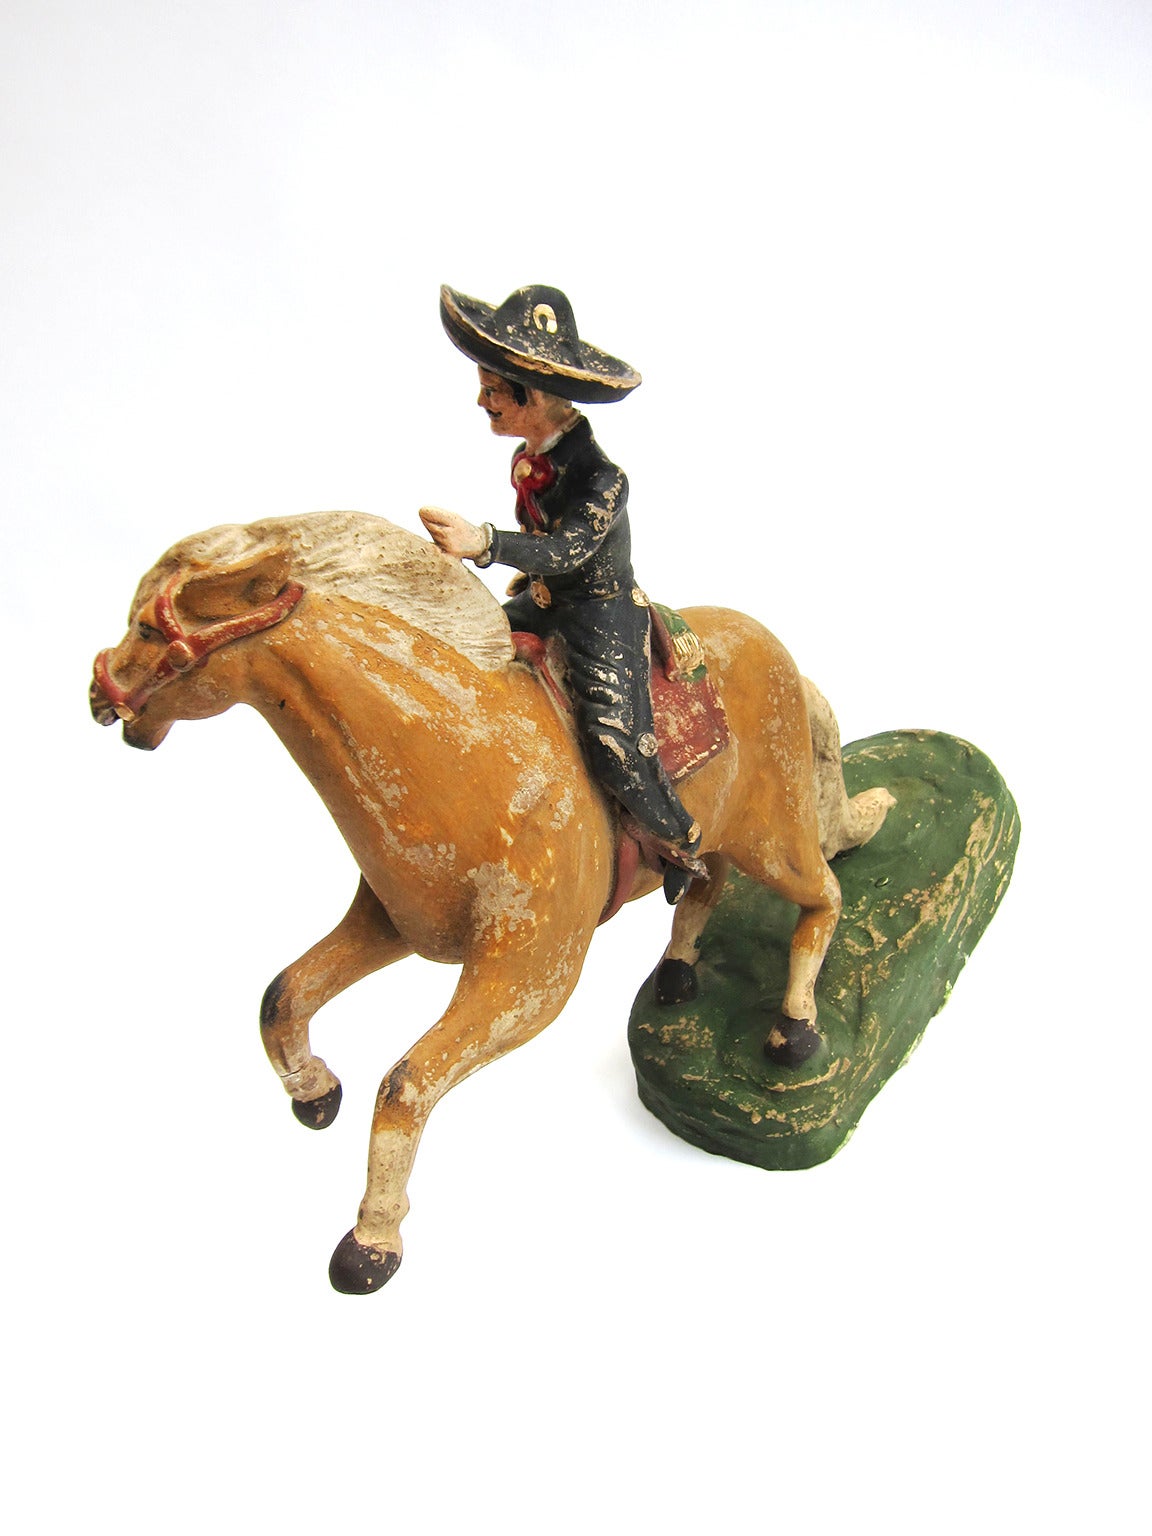 Mexican Mounted Charro Figure from Tlaquepaque